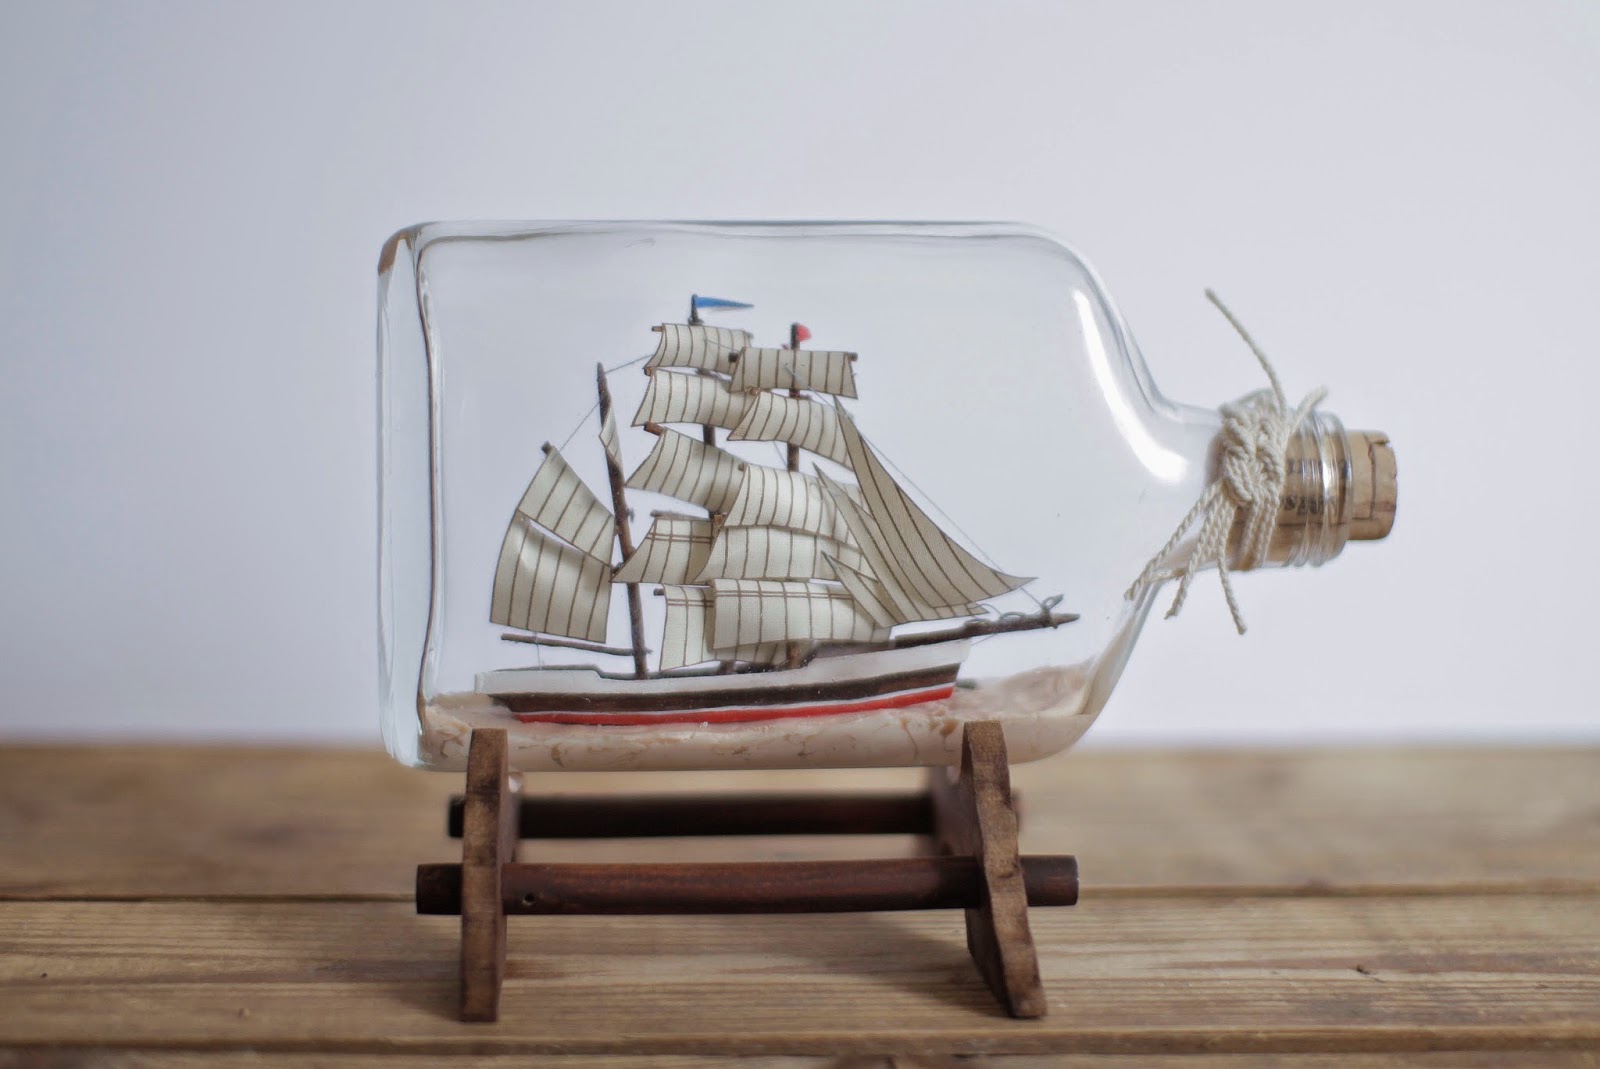 Amazing Ship In A Bottle Pictures & Backgrounds